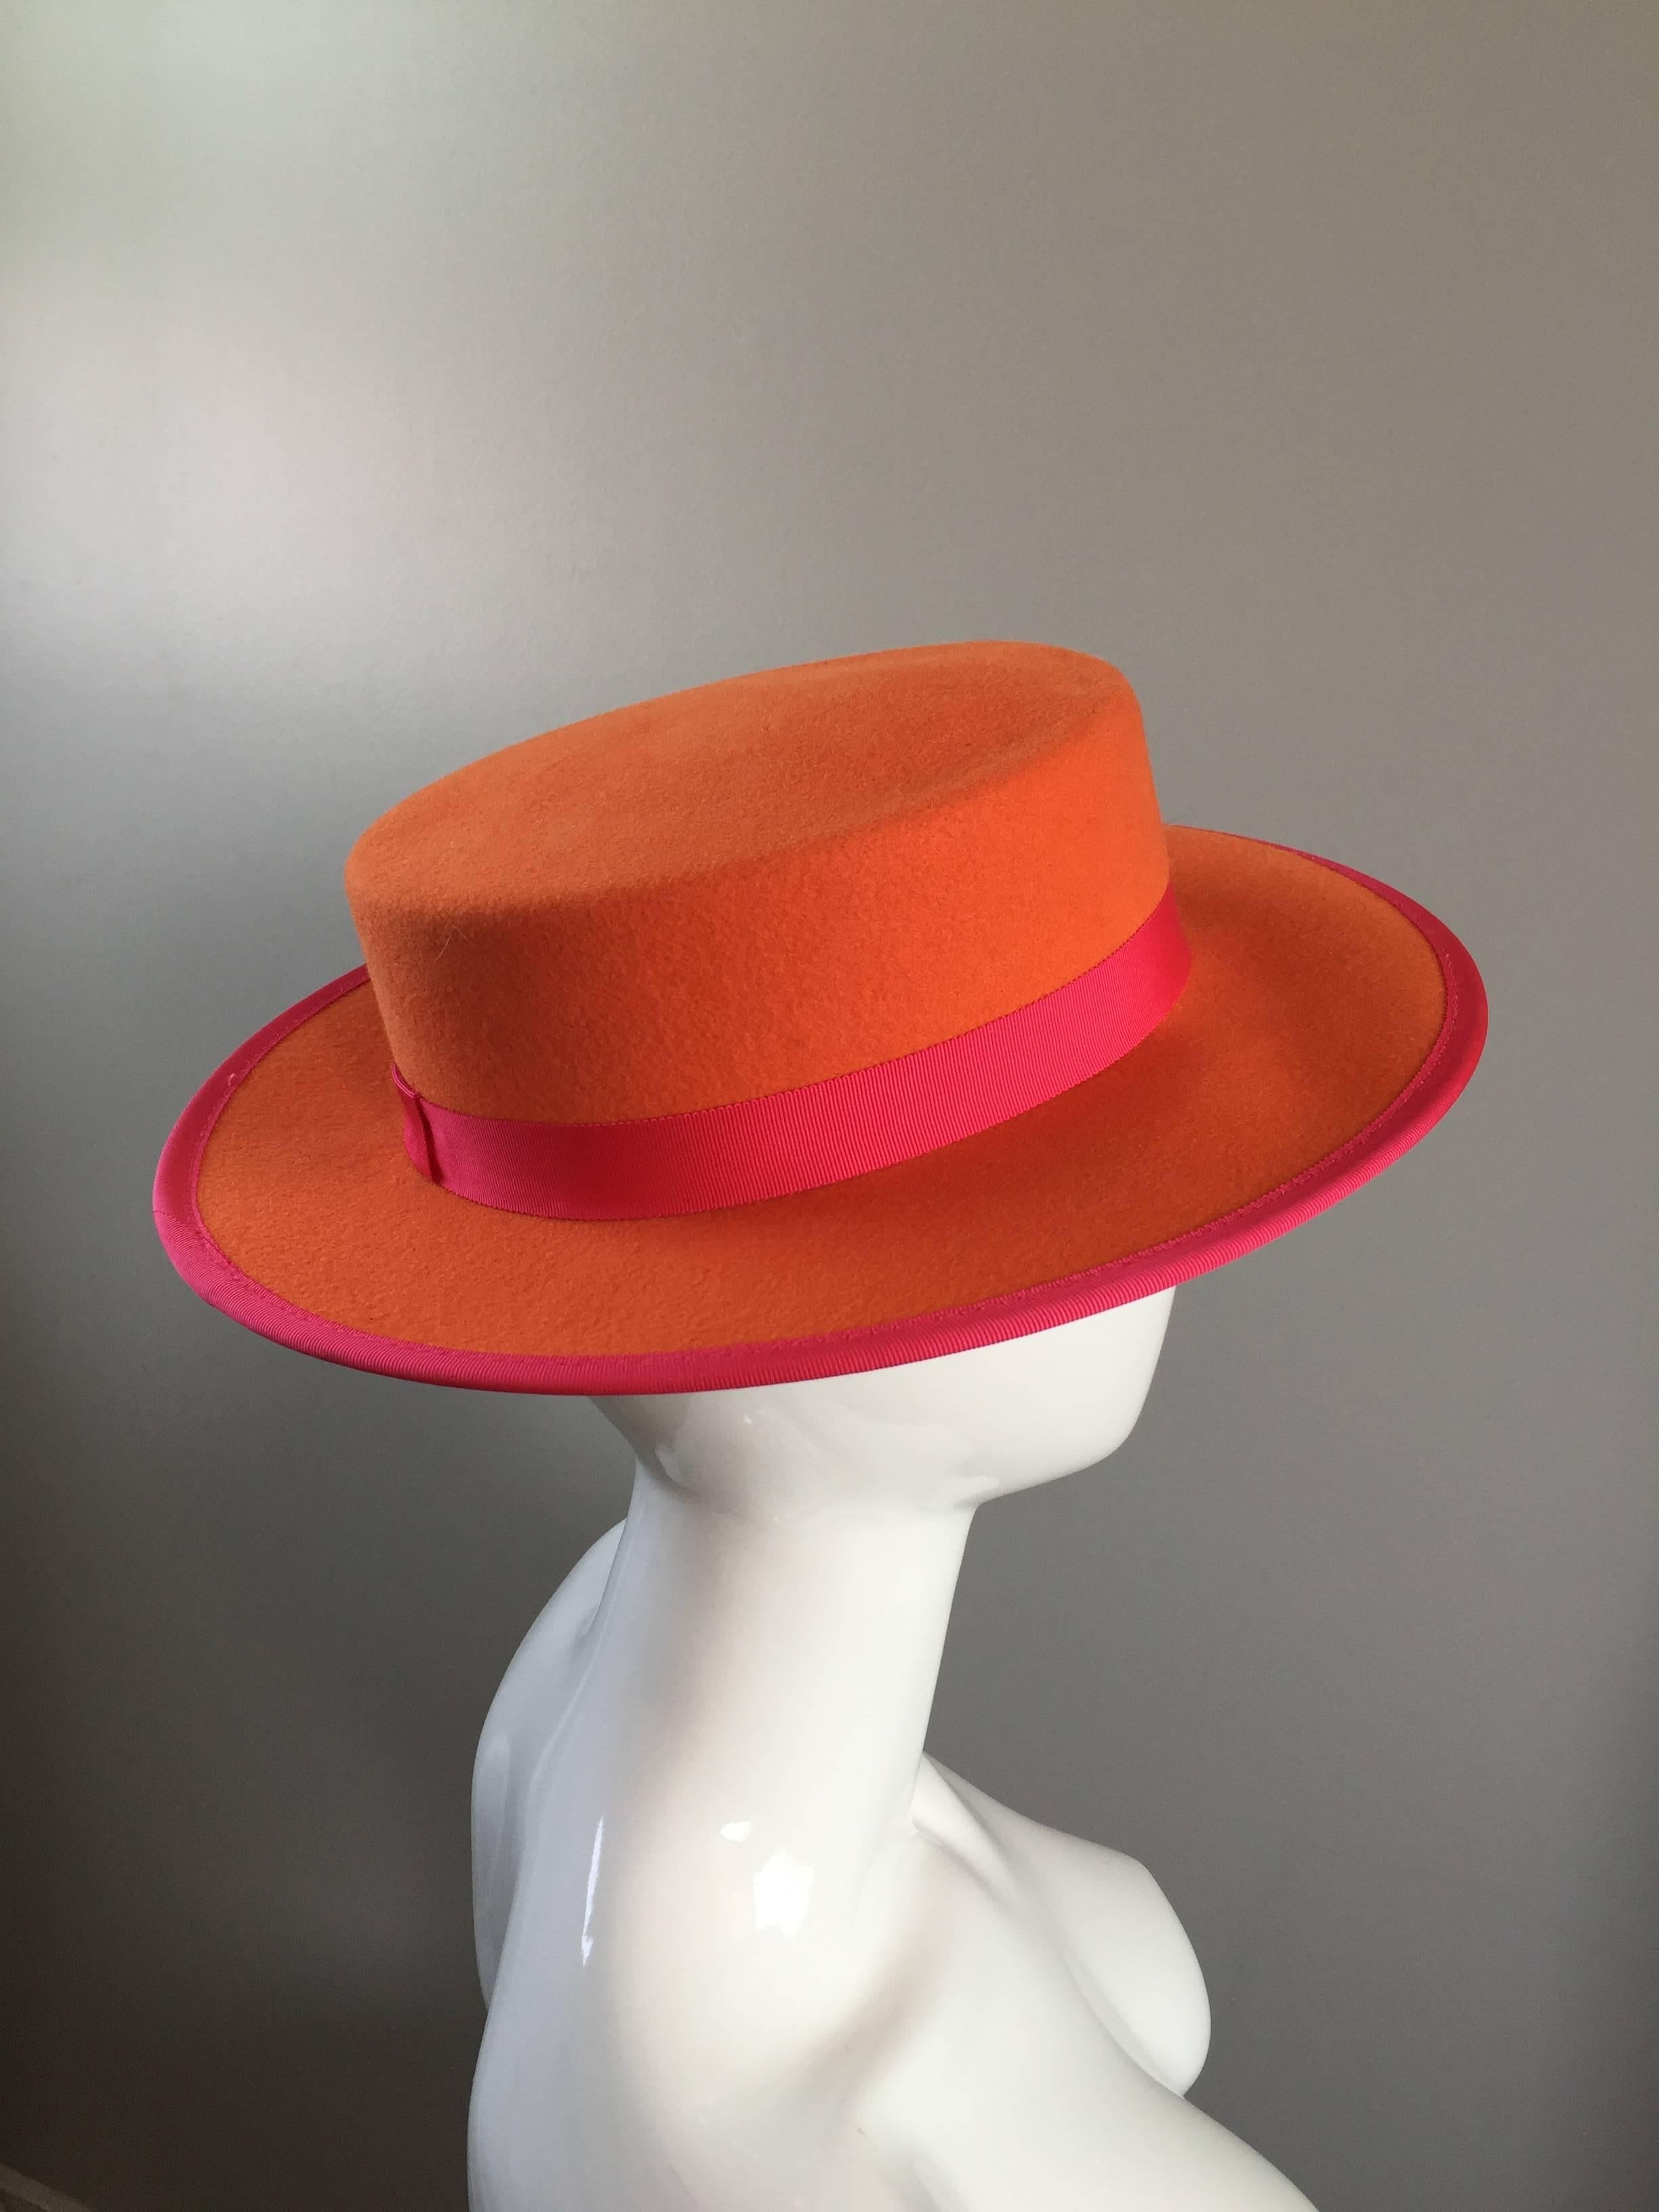 1960s Tina Too Bollman Neon Orange + Hot Pink Wool Doeskin Felt Vintage 60s Hat In Excellent Condition For Sale In San Diego, CA